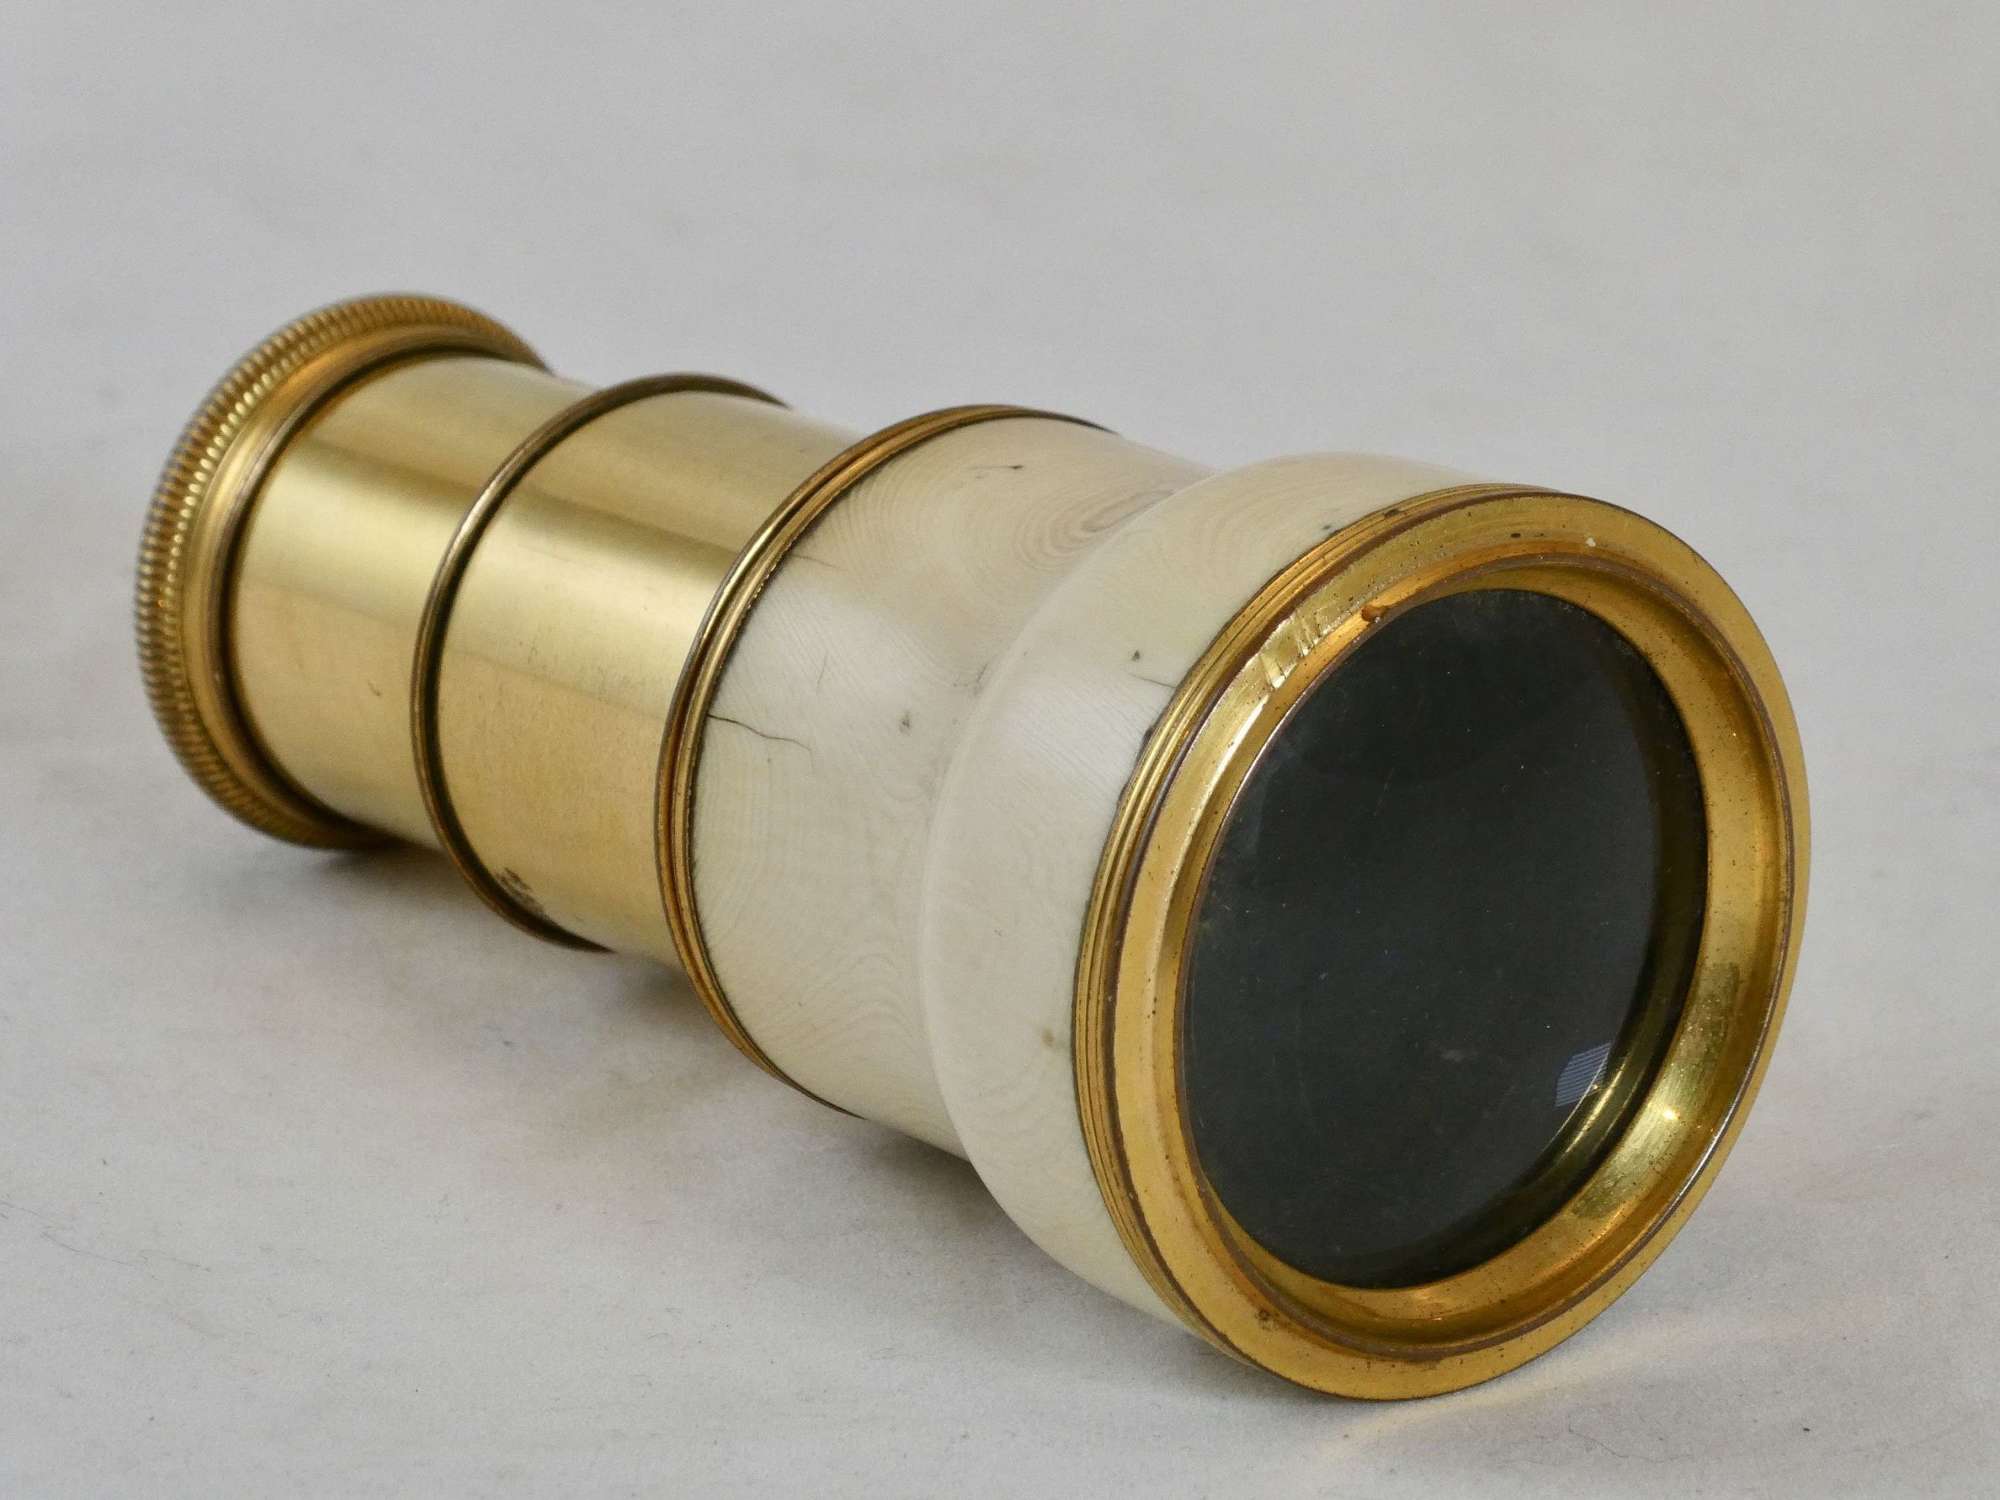 French Opera Monocular by Chevalier of Paris